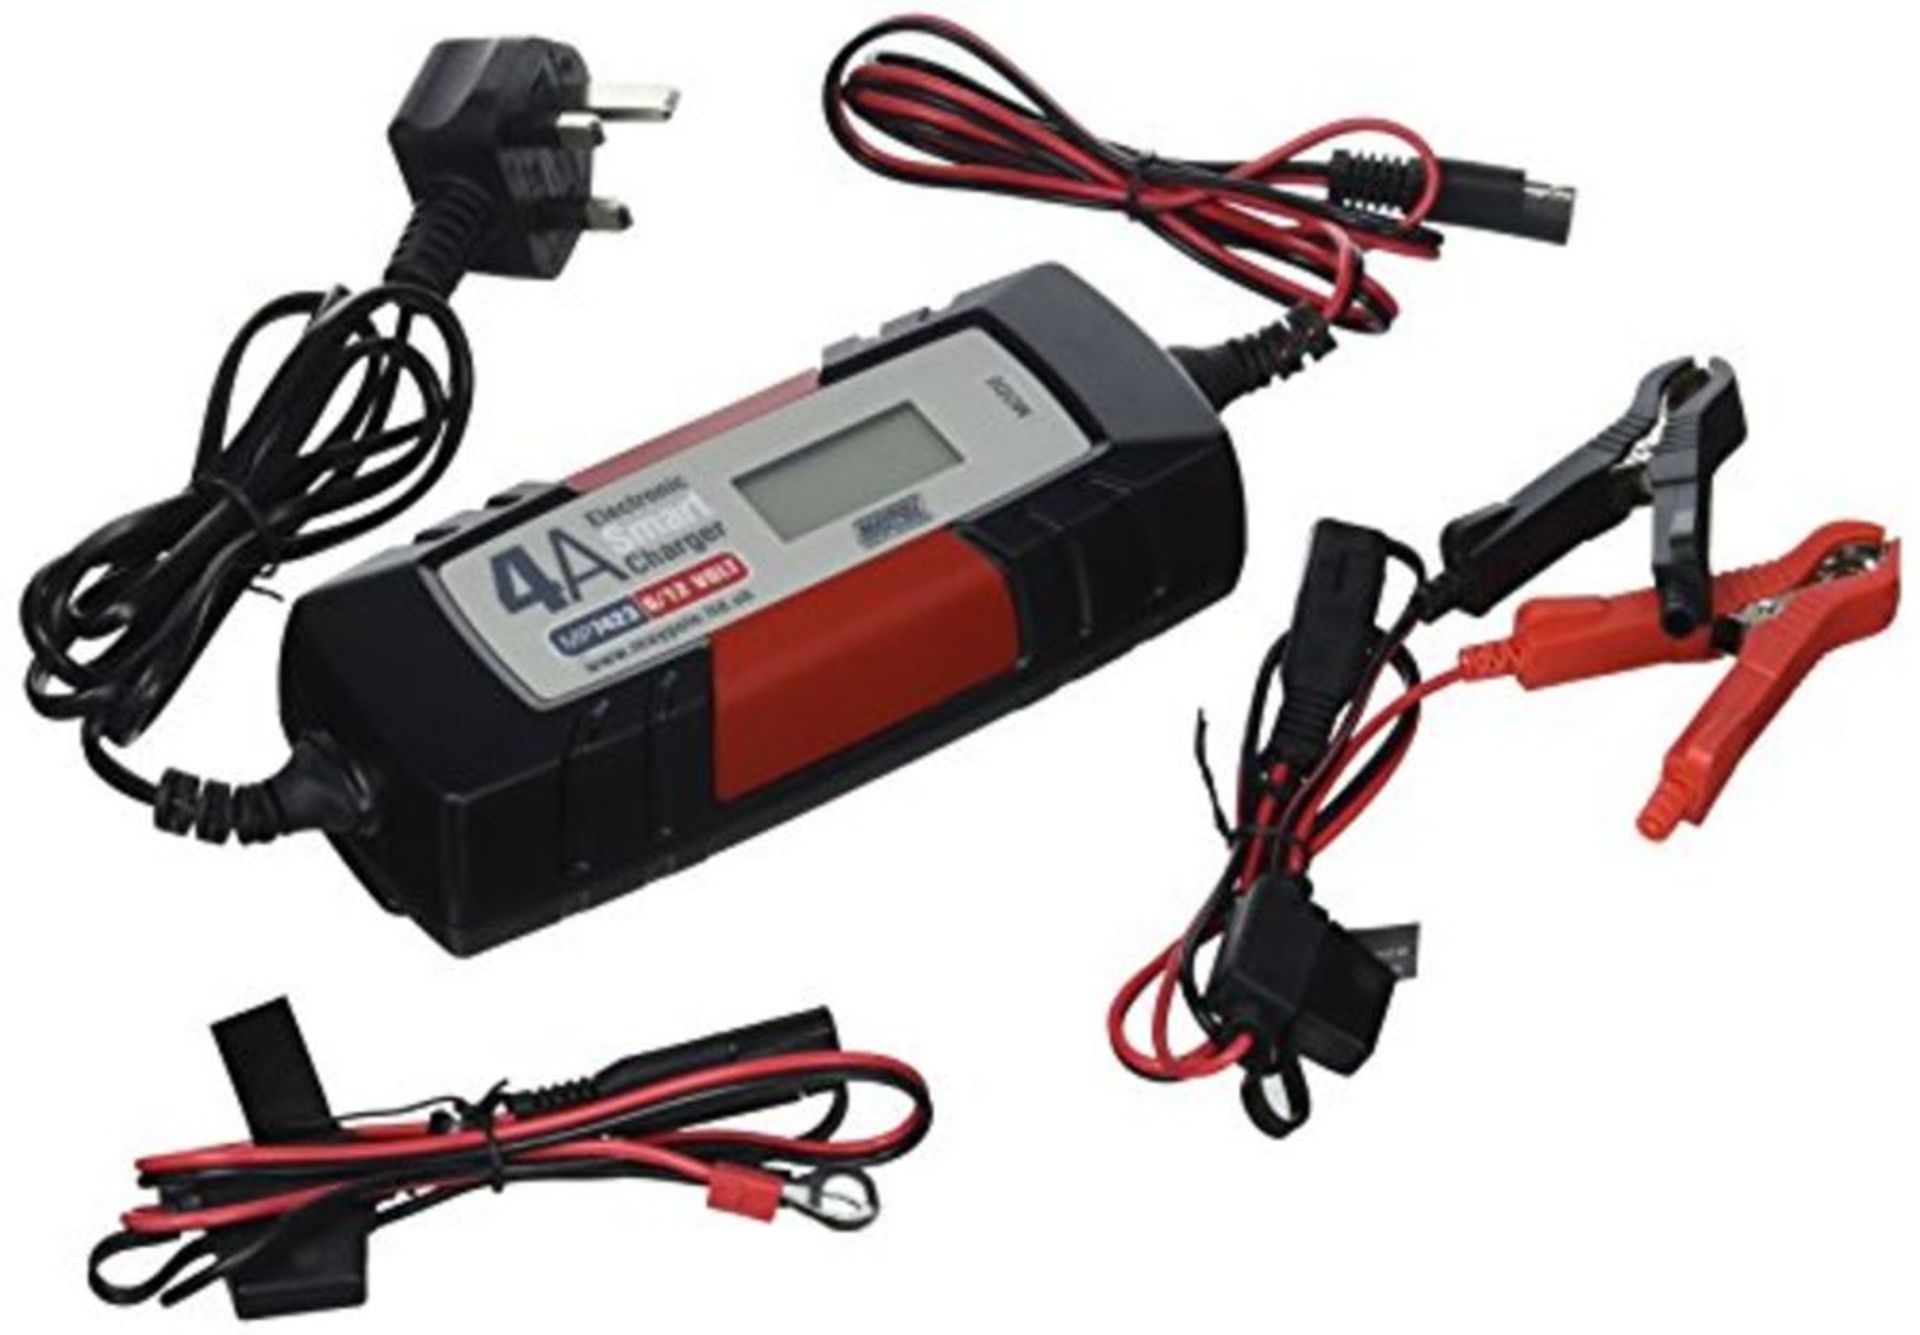 Maypole 7423A Battery Charger Auto Electronic 4A 12V